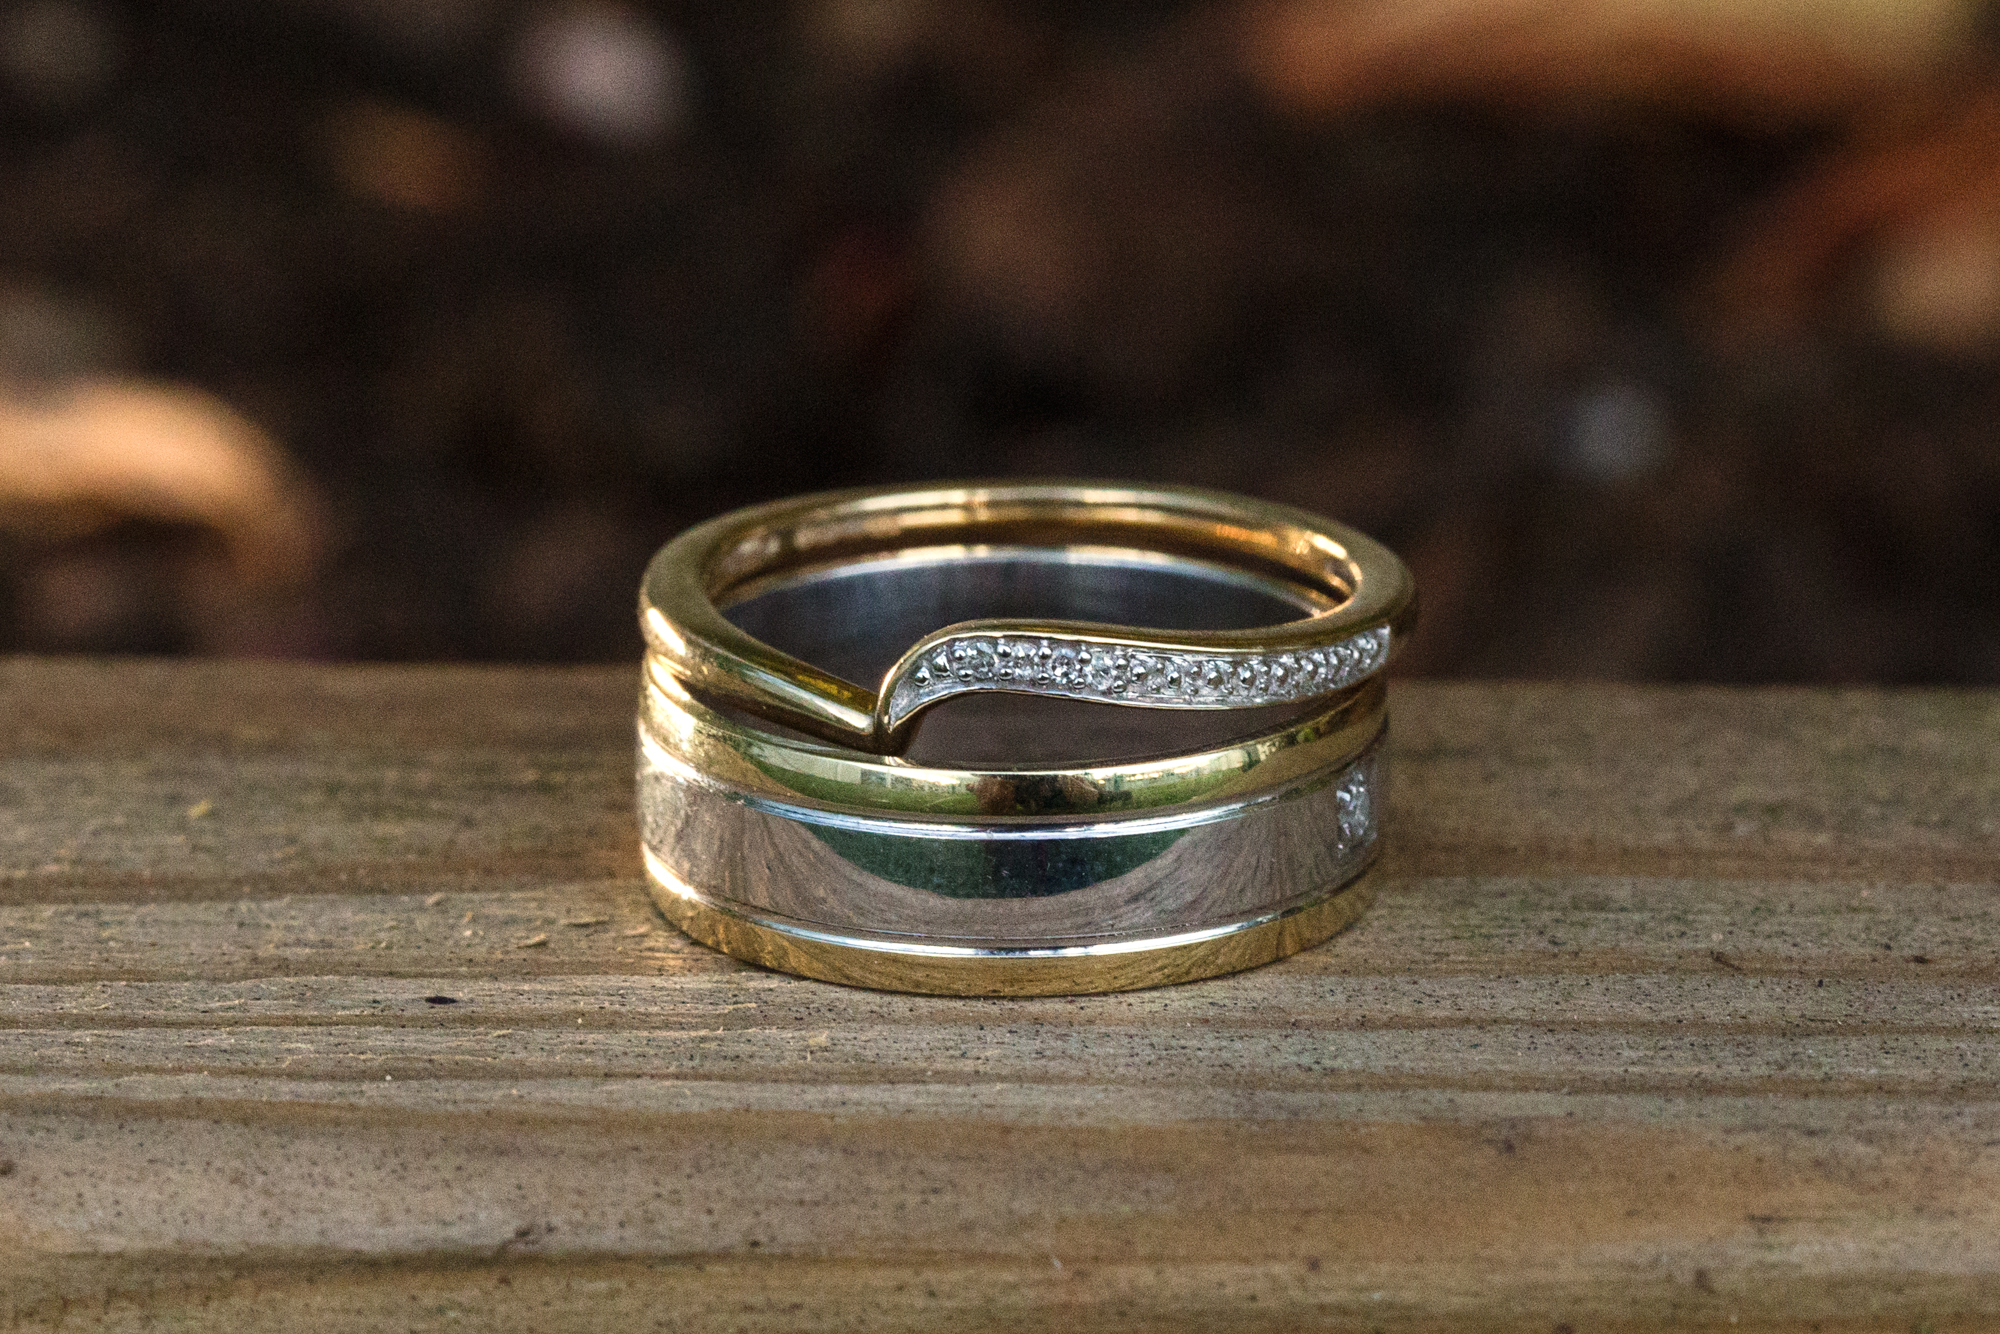 Wedding rings at Ridgeway gold course, Thornhill, Caerphilly Mountain